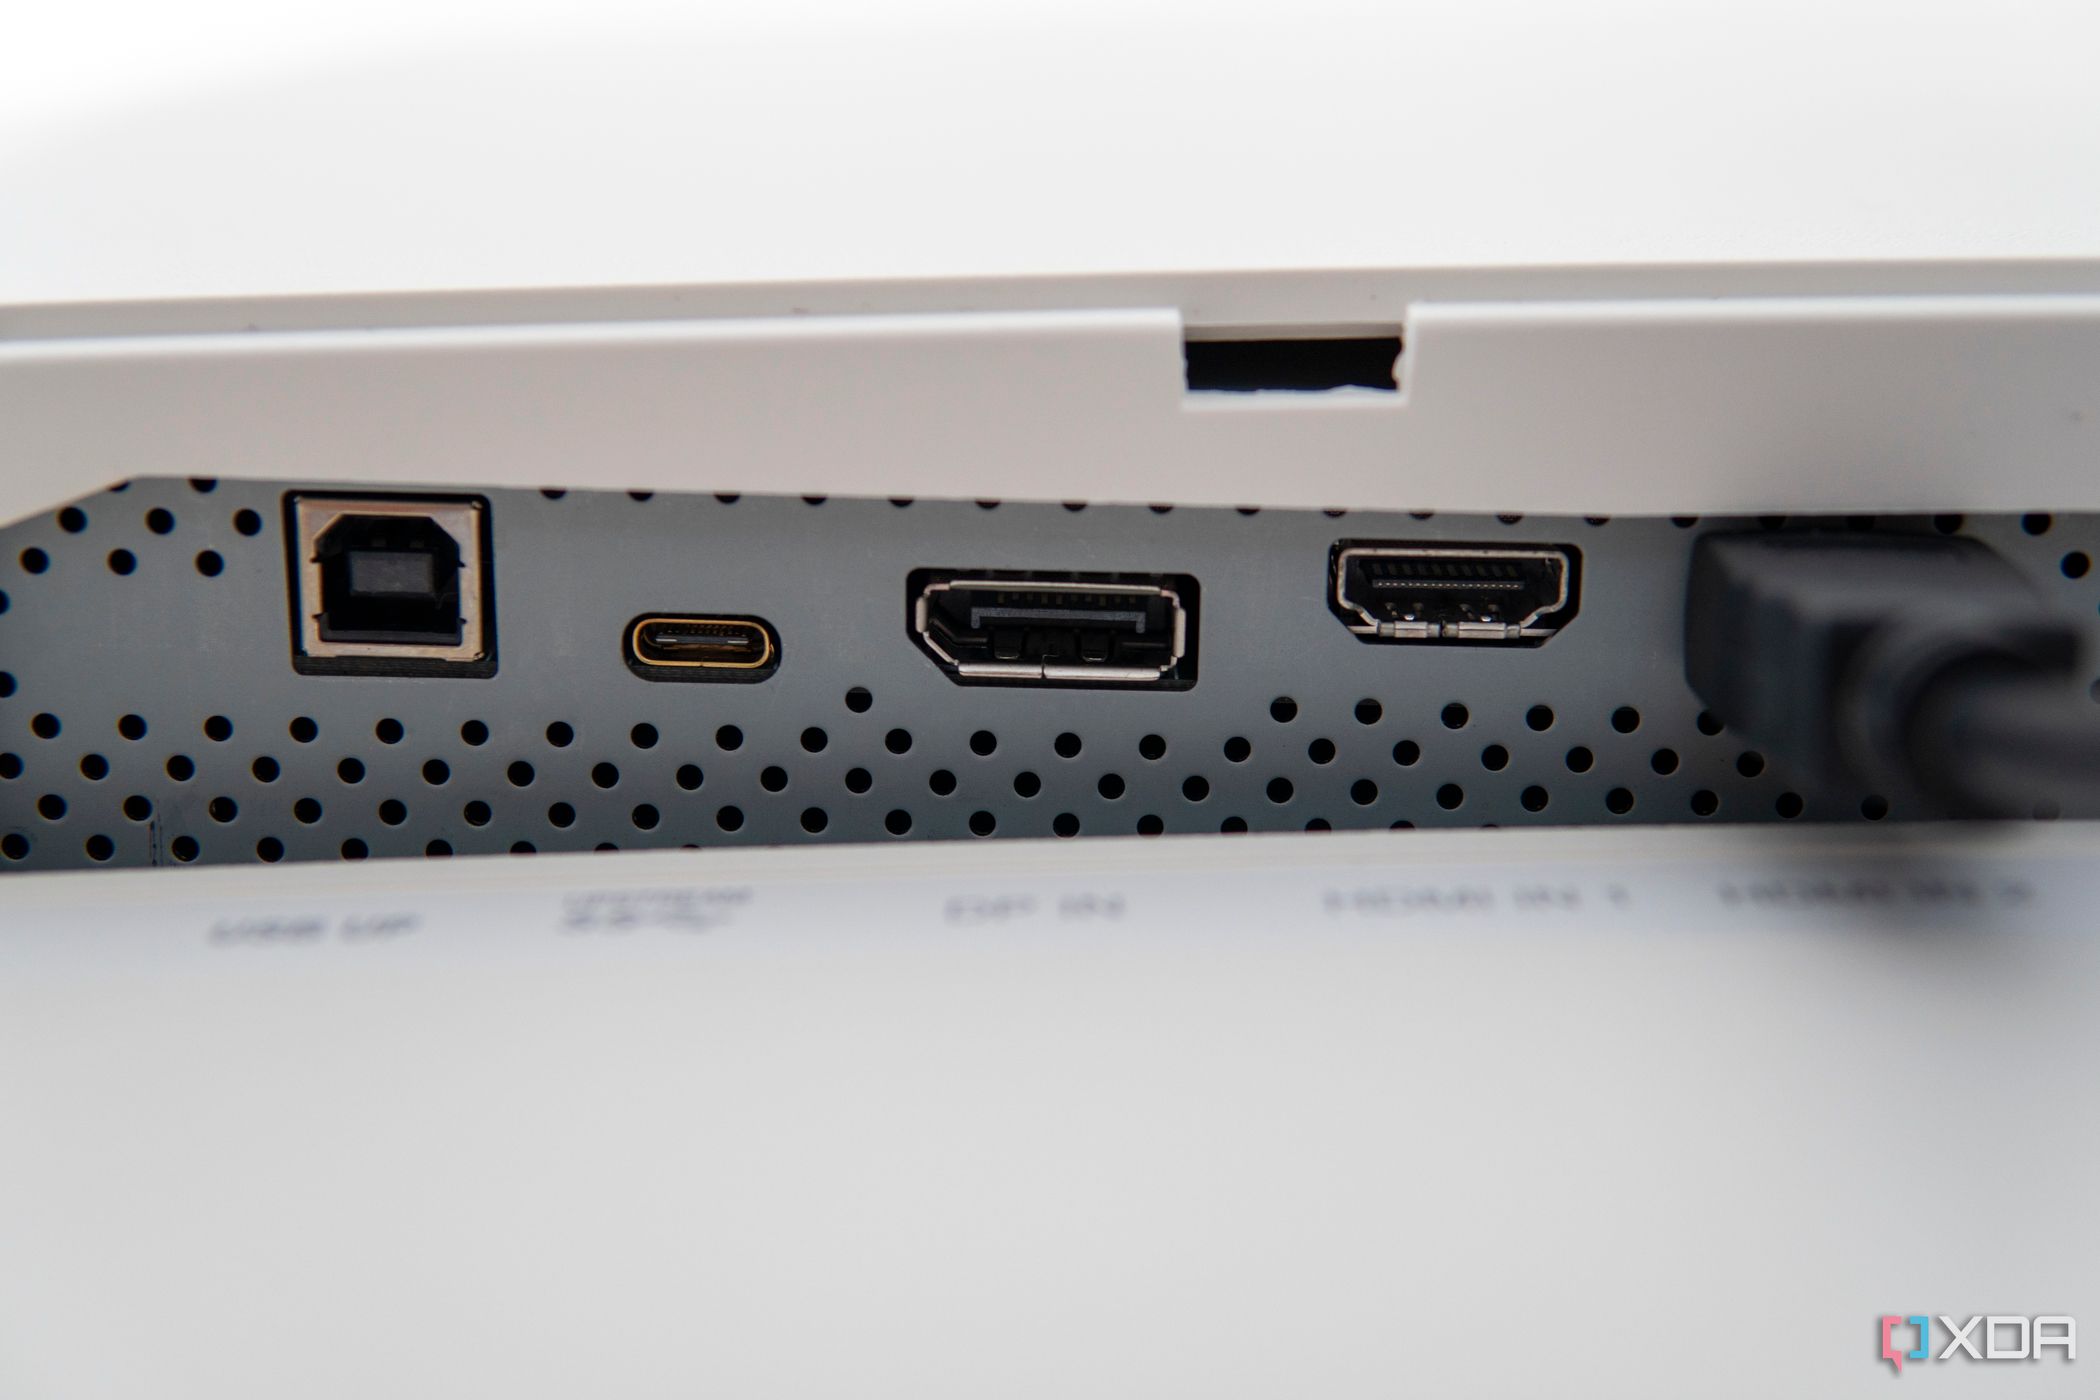 Close-up view of the ports on the LG UltraWide 49W95C